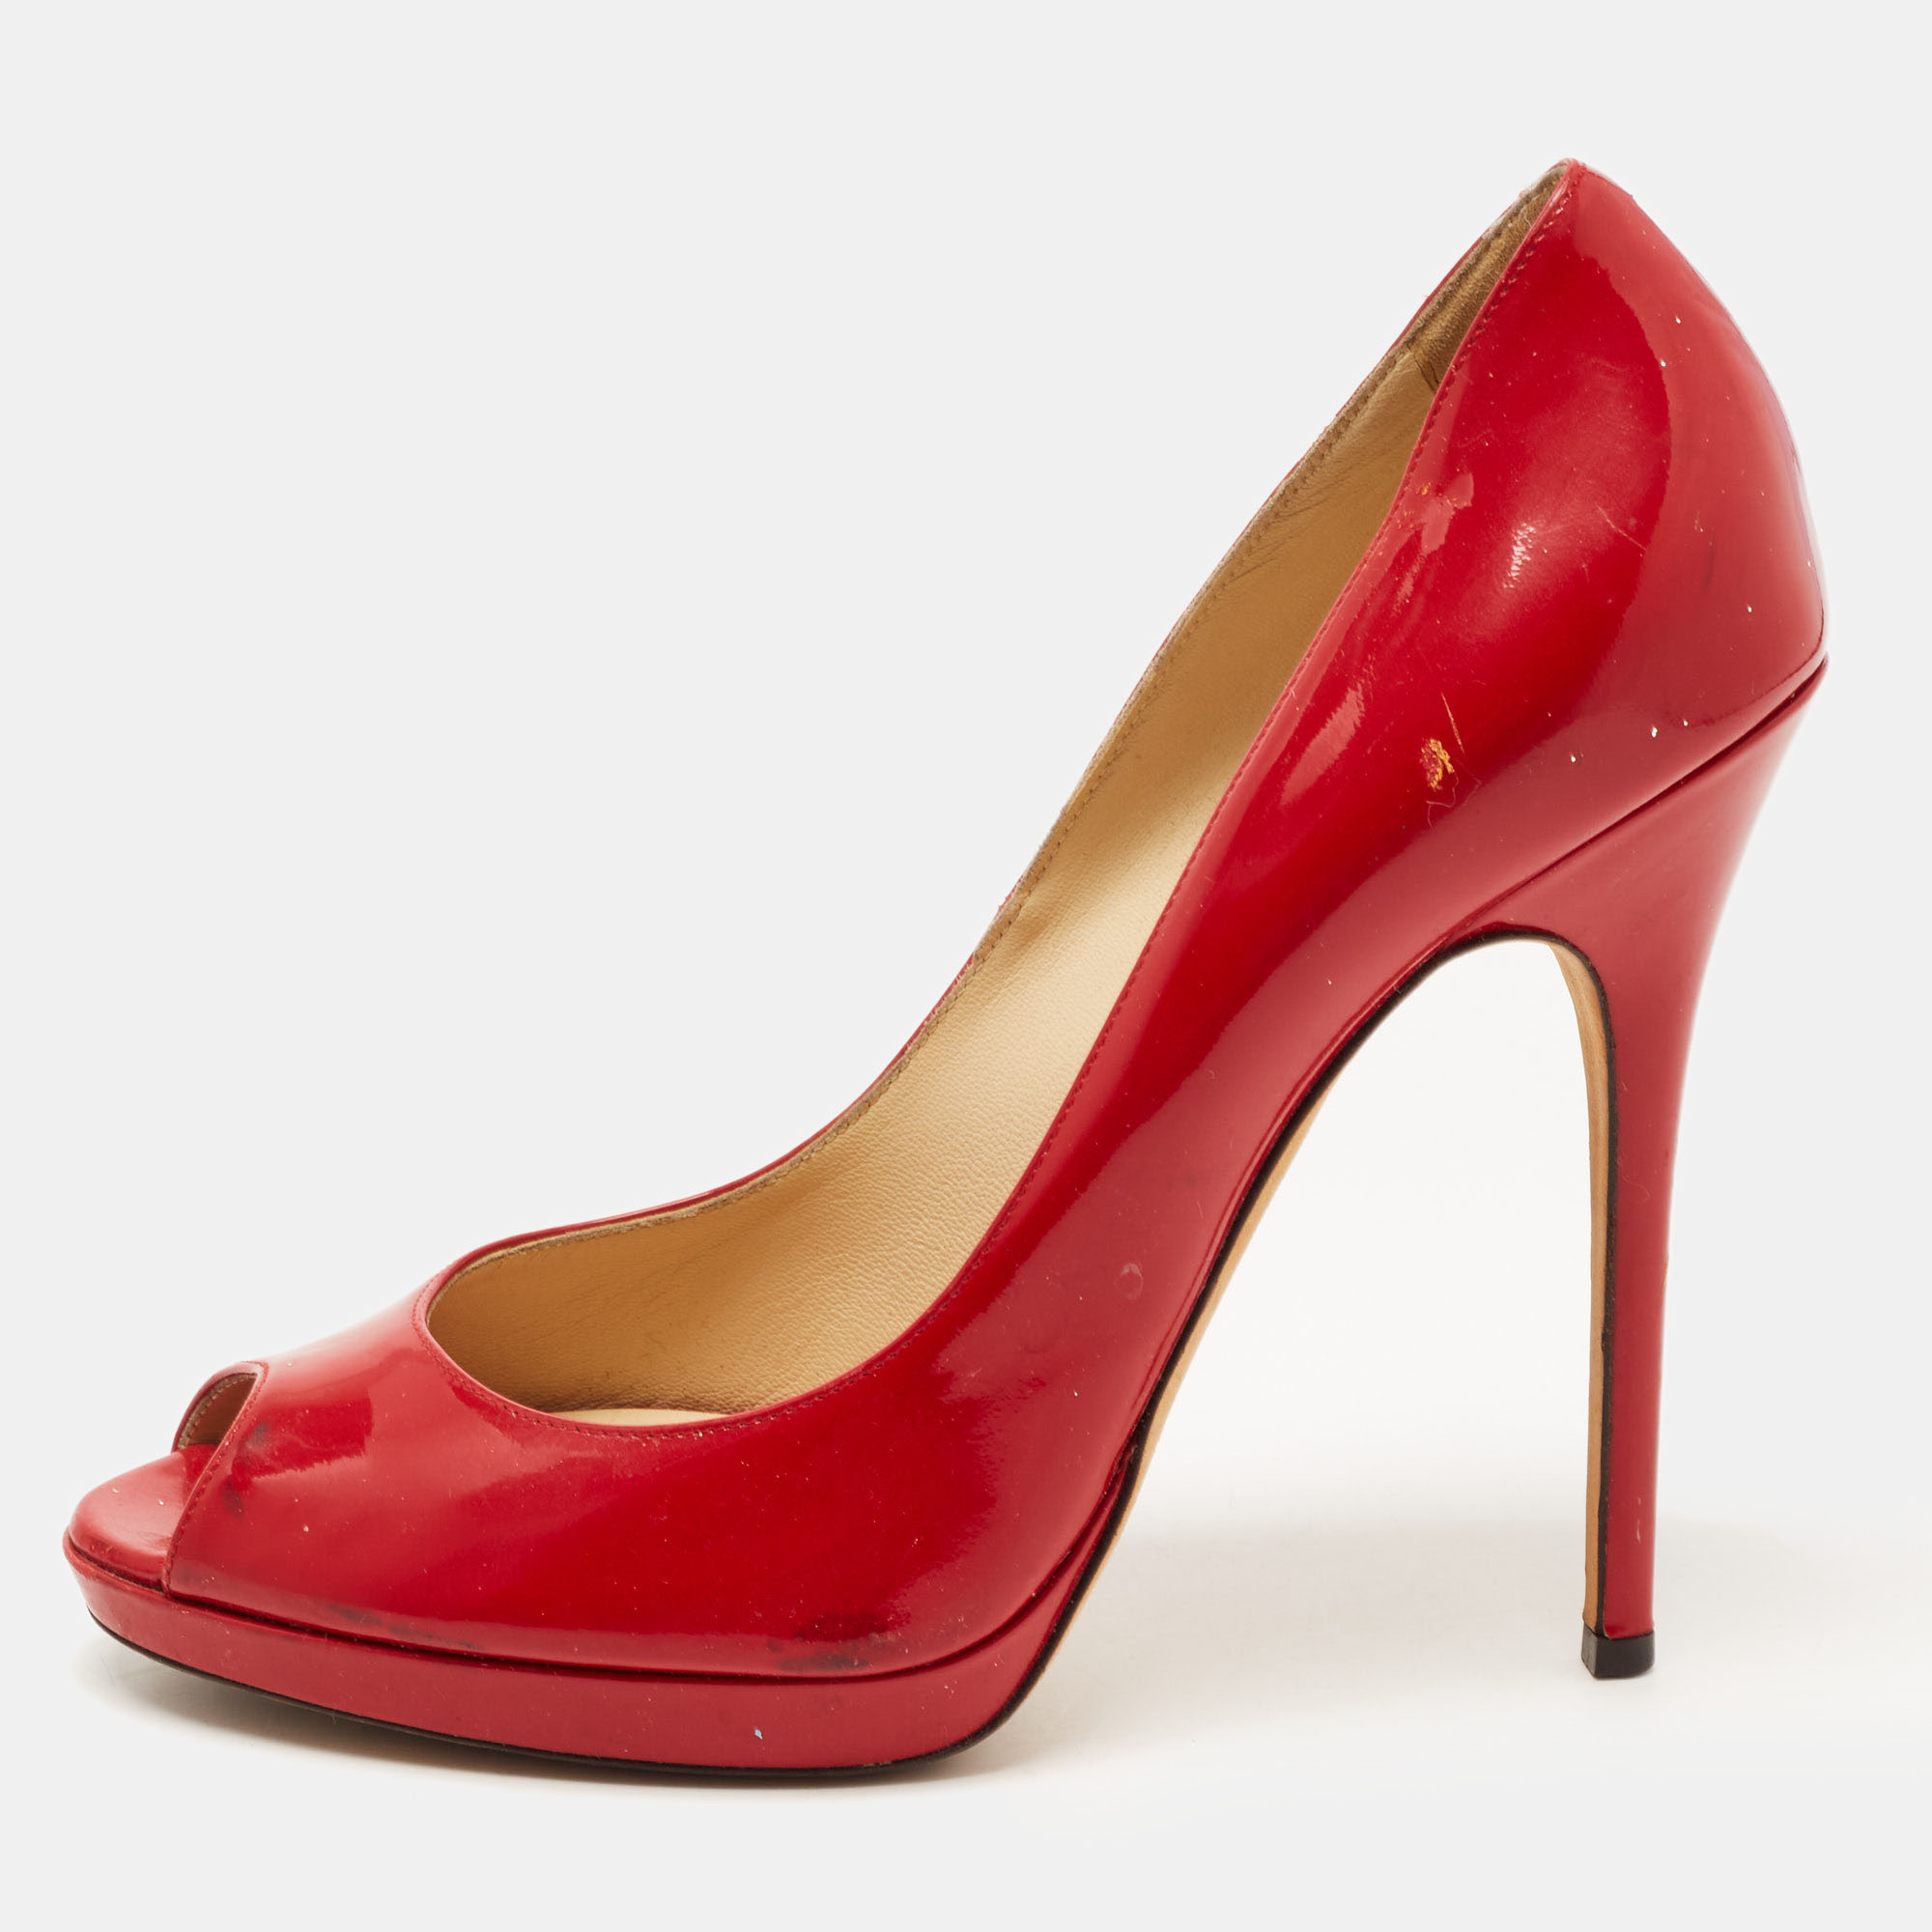 Pre-owned Jimmy Choo Red Patent Leather Quiet Platform Pumps Size 40